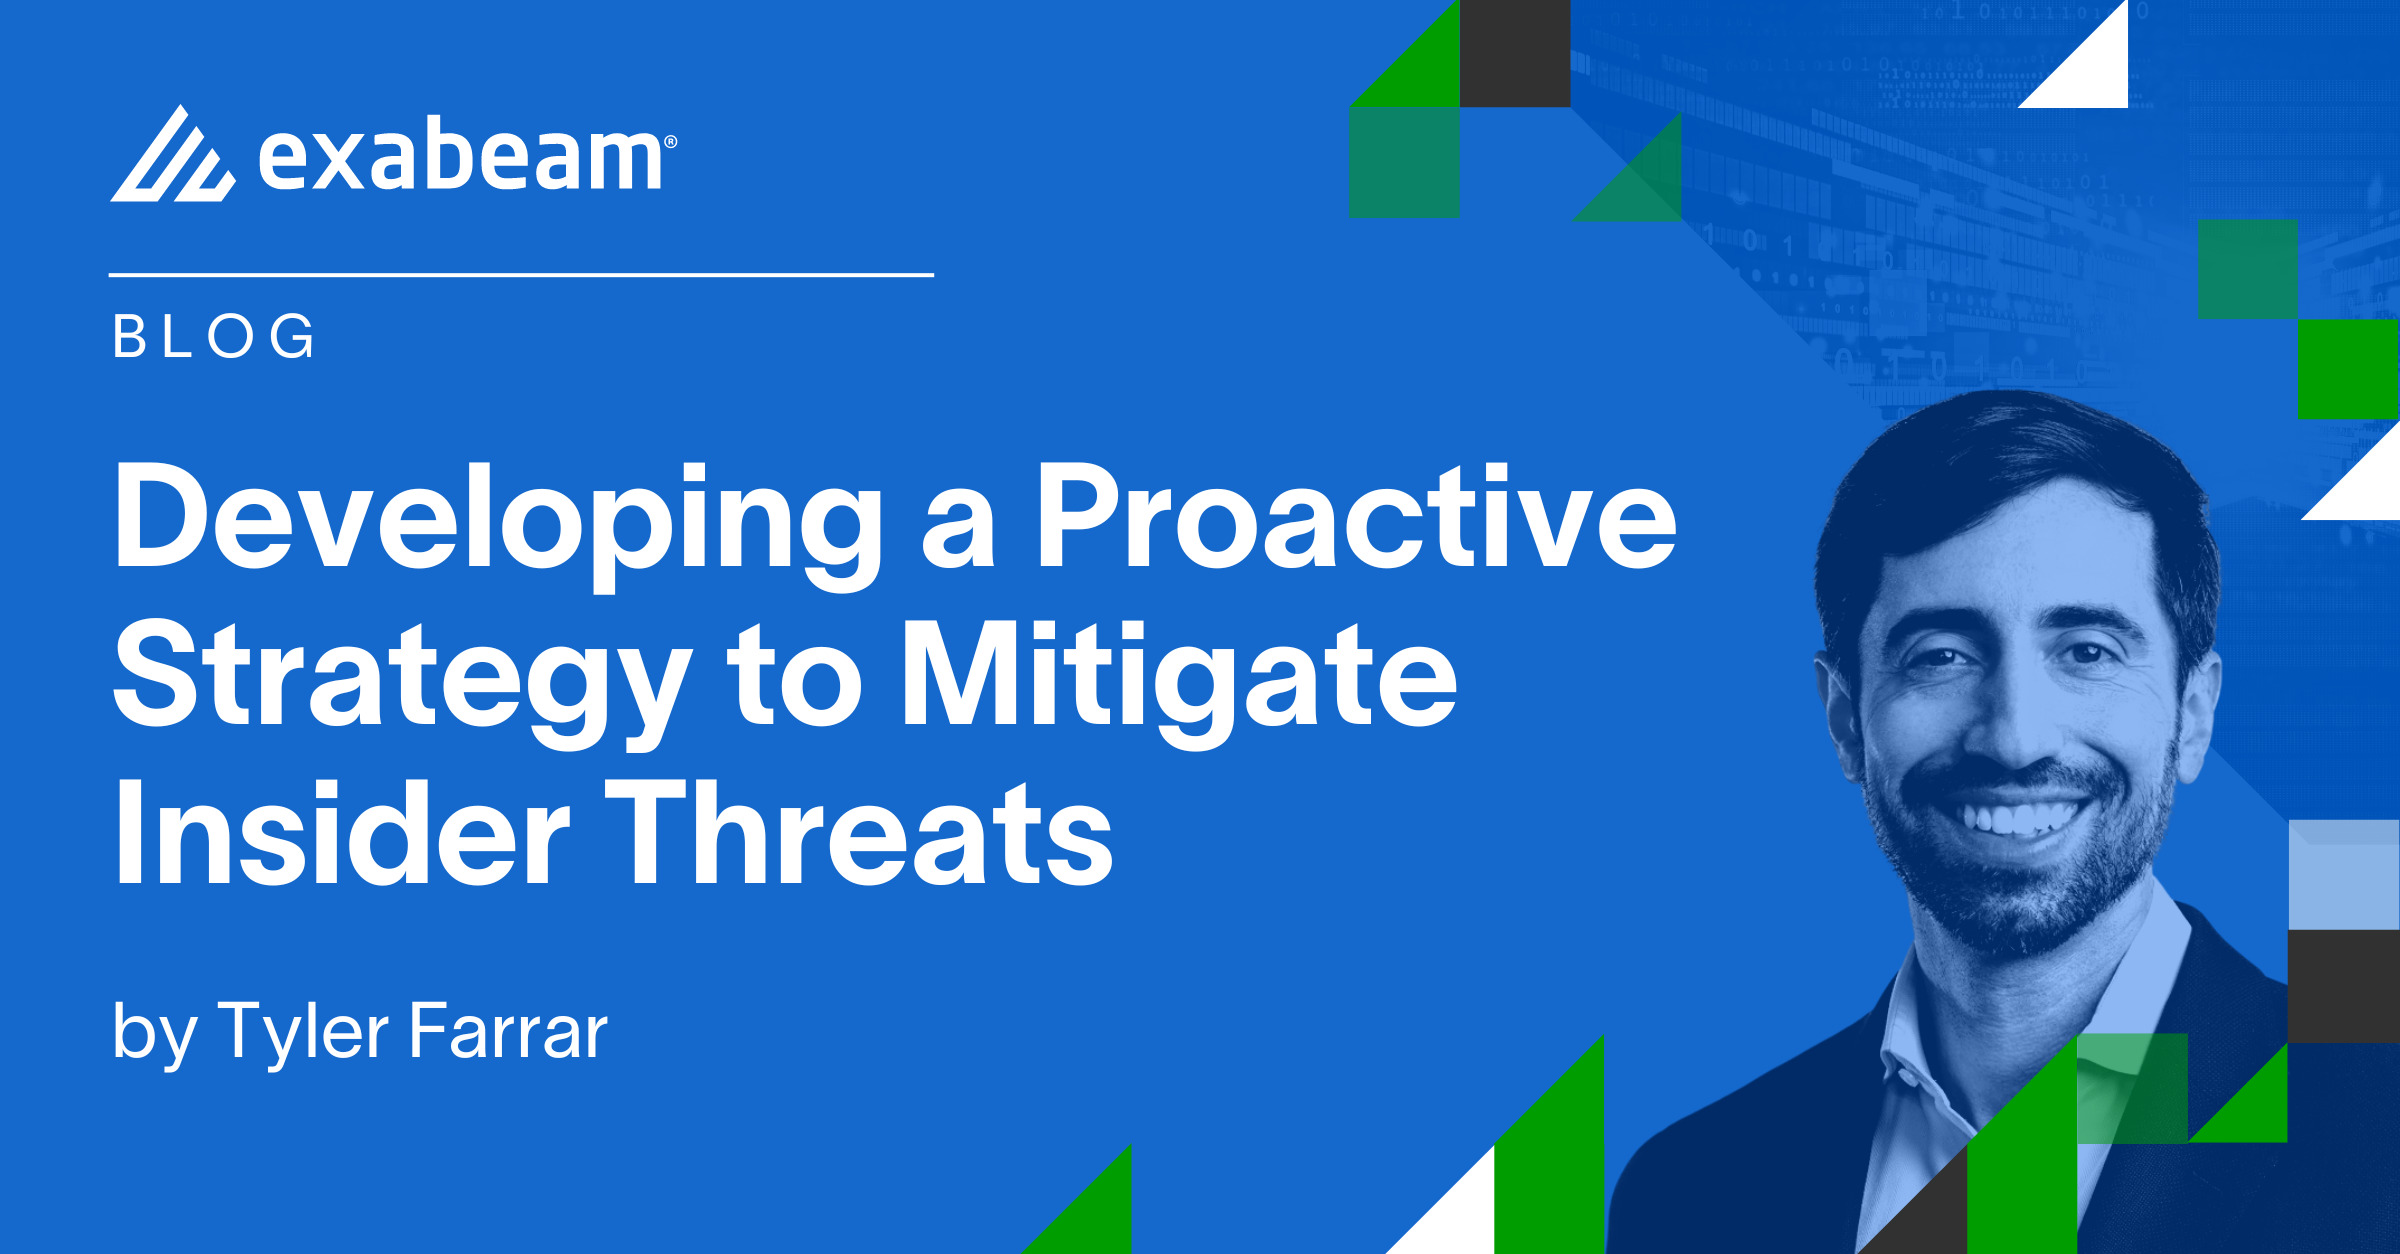 Developing a Proactive Strategy to Mitigate Insider Threats